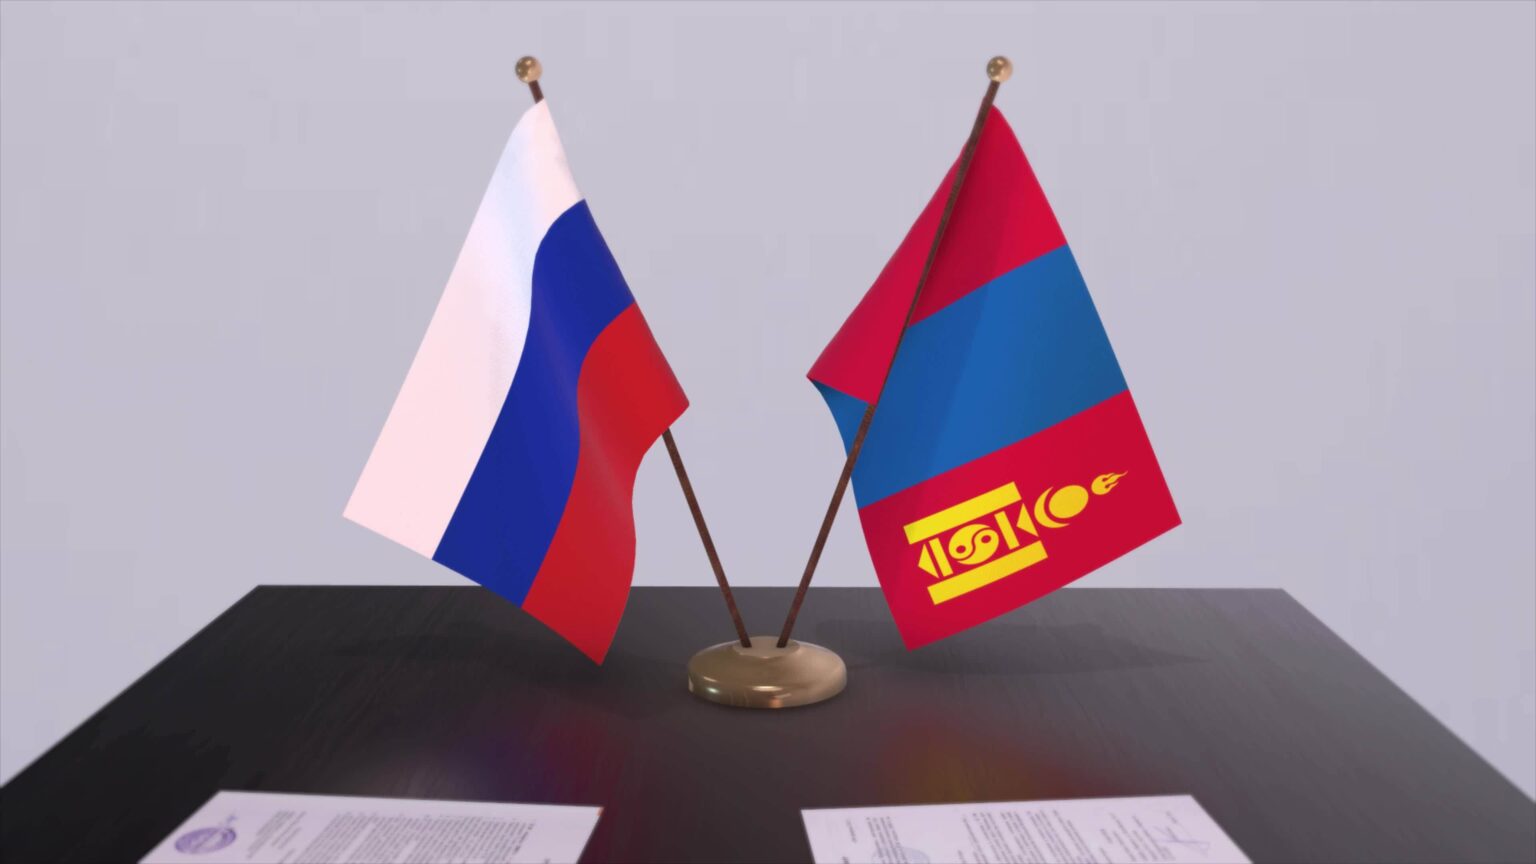 mongolia and russia national flag business meeting or diplomacy deal politics agreement animation video